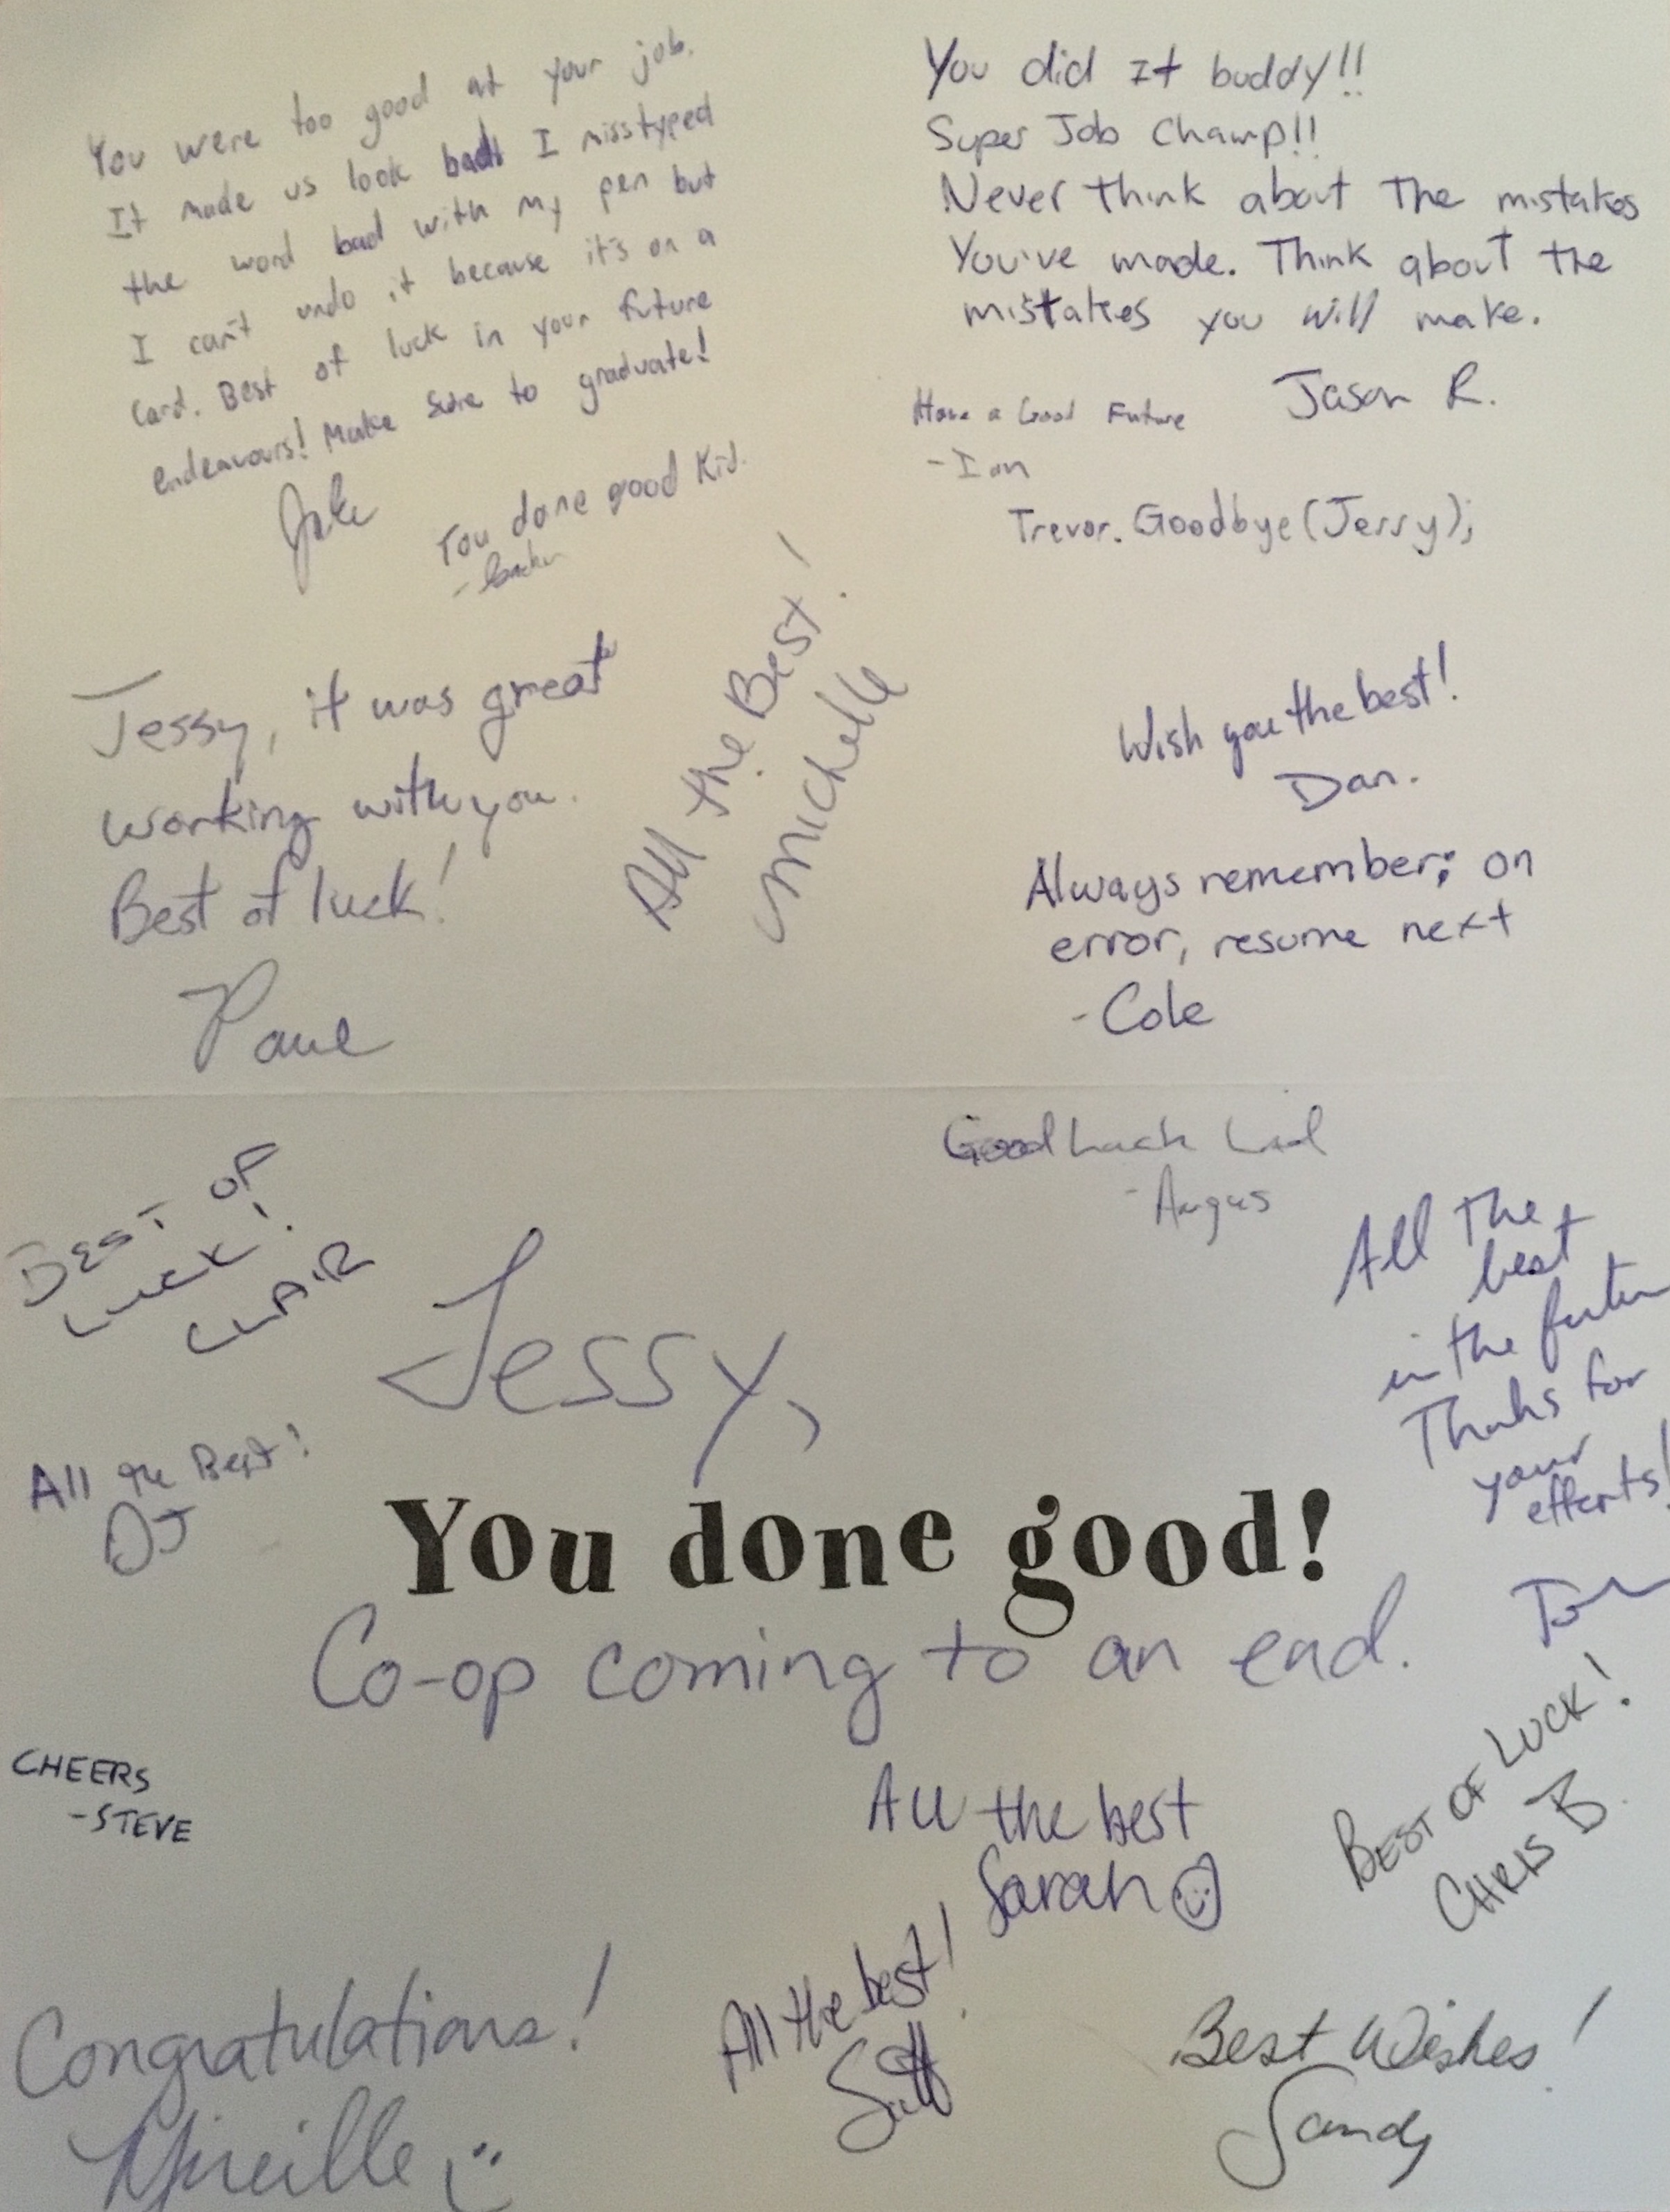 Going away card from the team